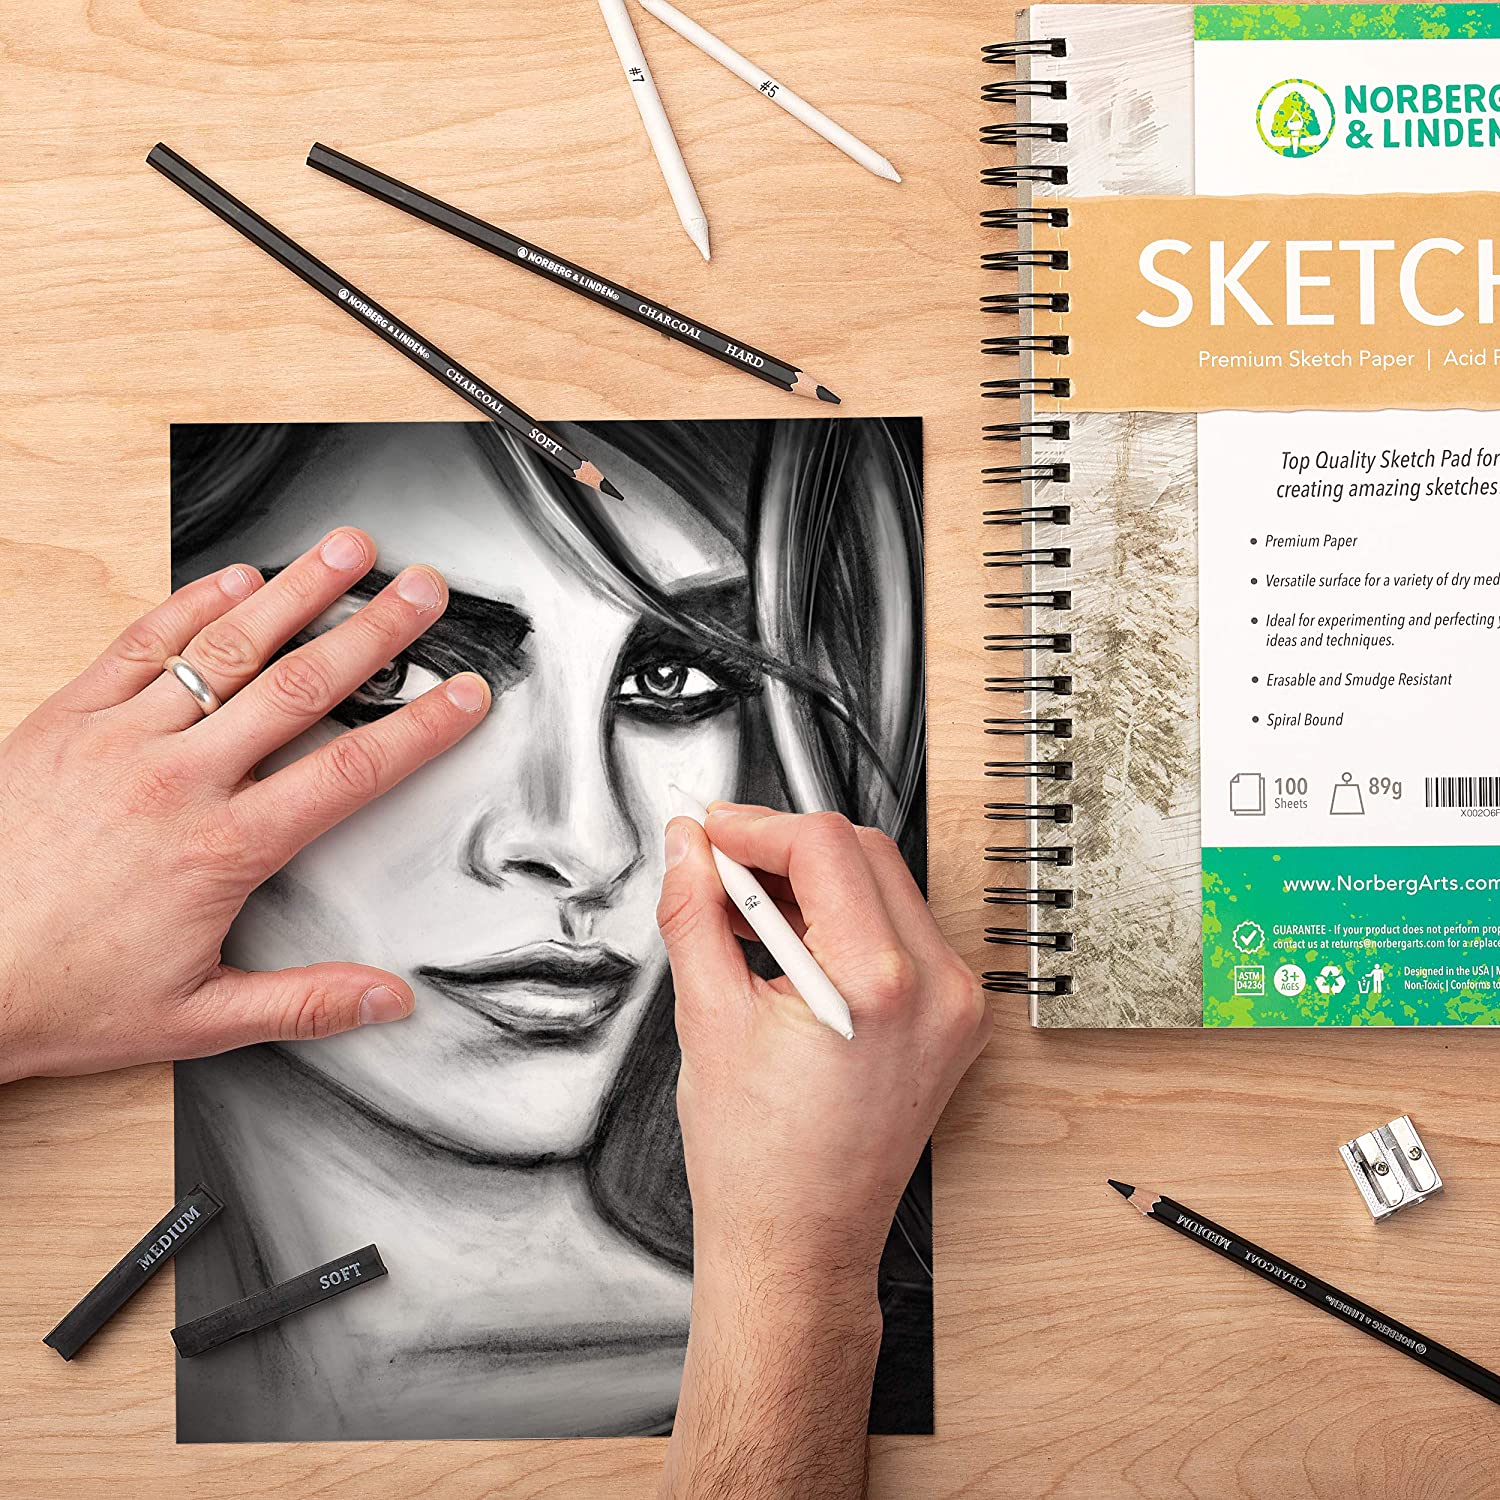 Norberg & Linden Sketch Pad 2 Pack - 9x12 inch Premium Heavyweight Paper for Artwork - Ideal Texture for Dry Media - Erasable & Anti-smudge, Spiral